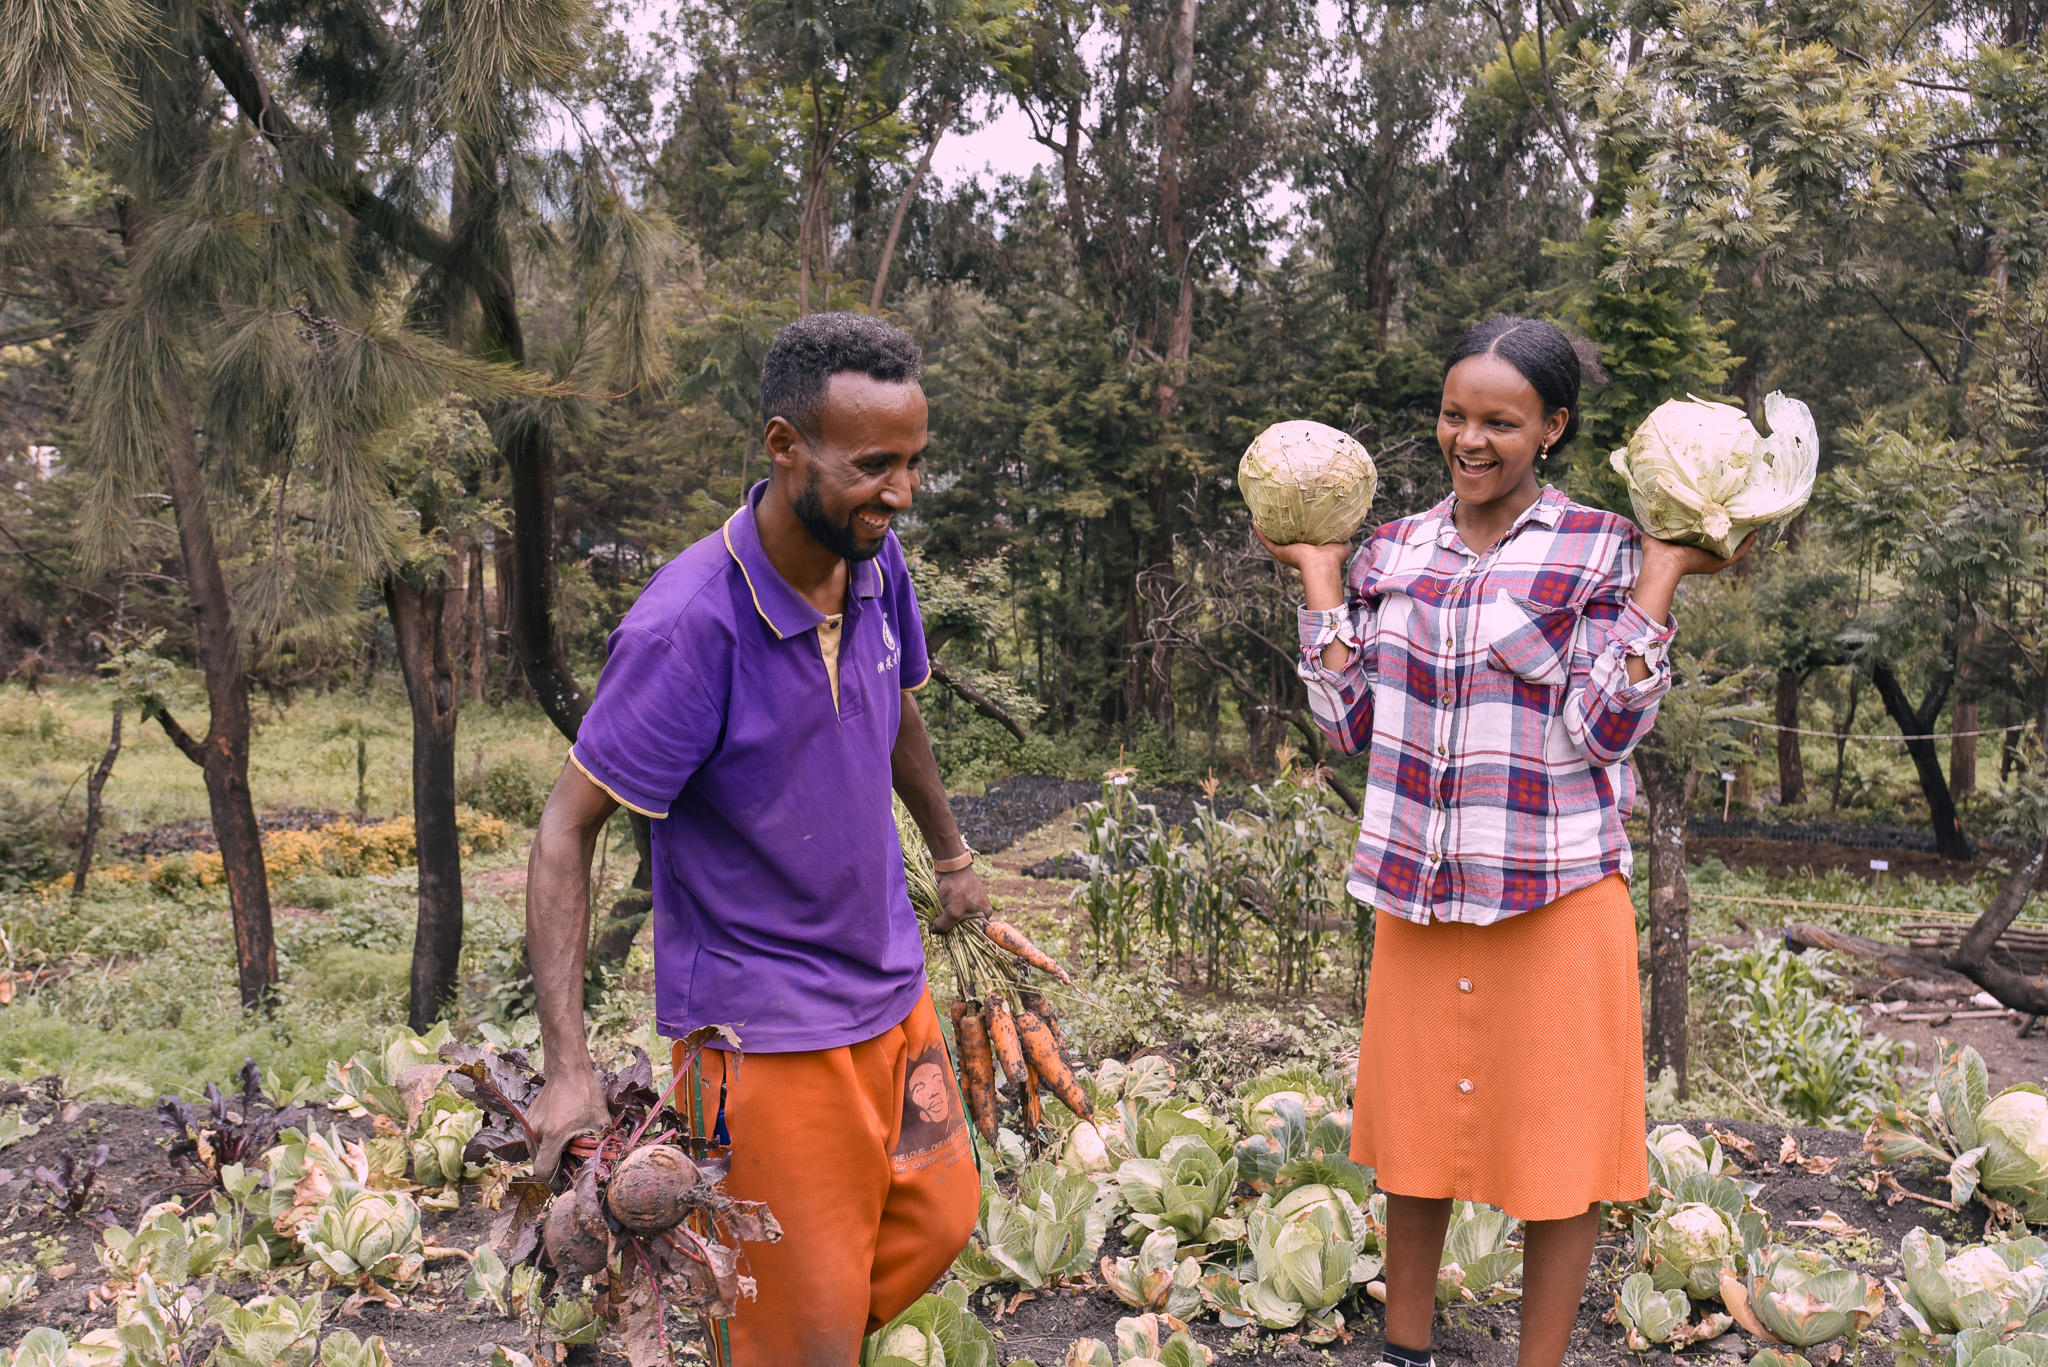 Shume and her husband, Misgana in the land with some of the vegetables they harvested after UN Women’s support.